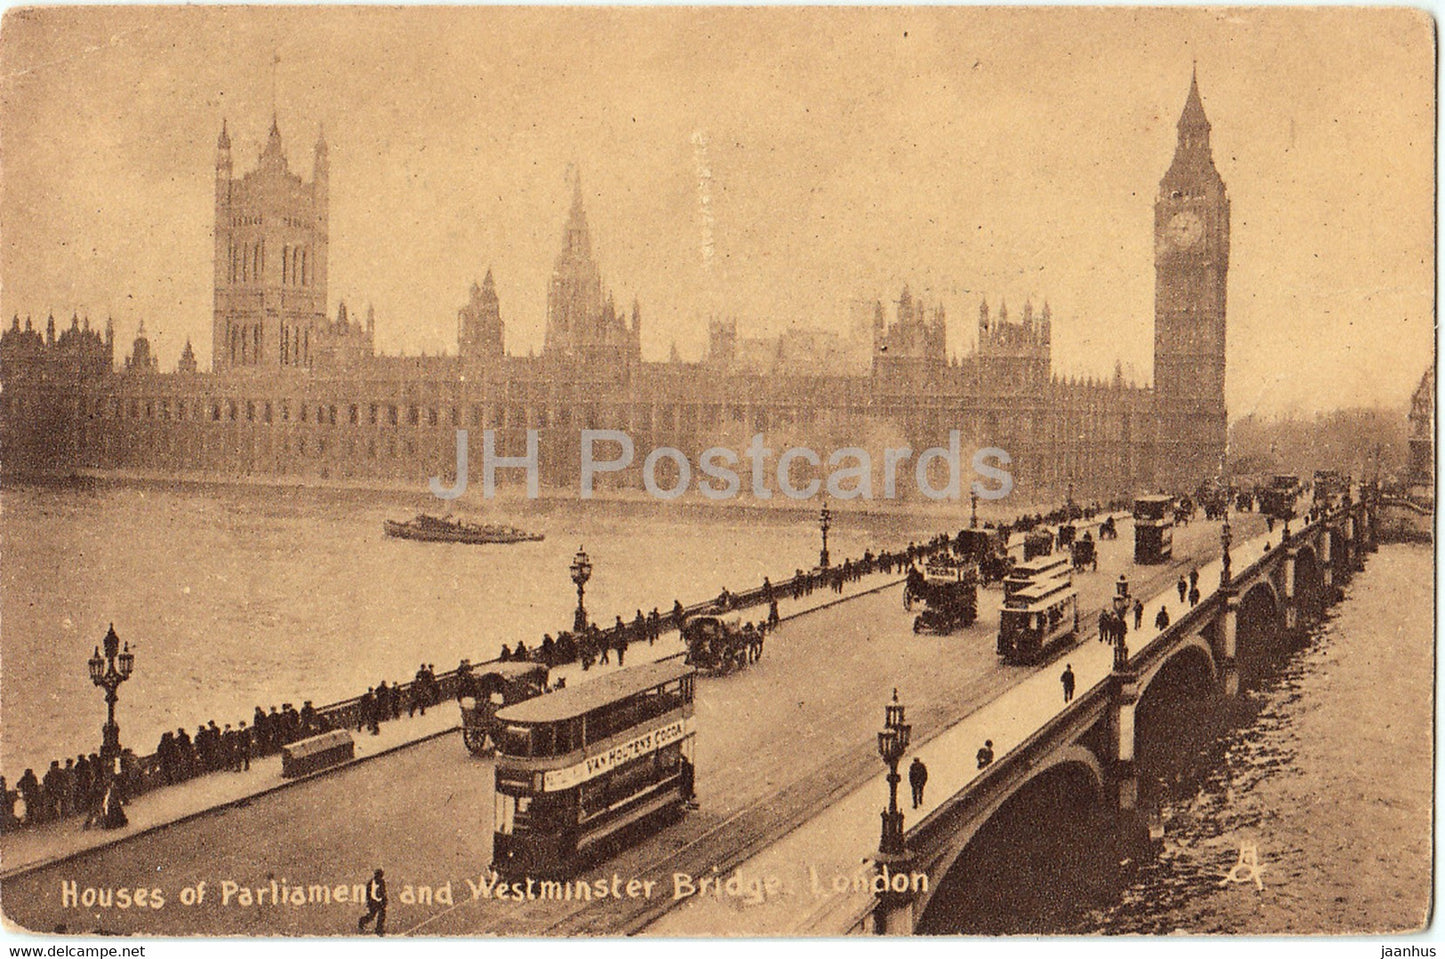 London - Houses of Parliament and Westminster Bridge - tram - Tuck old postcard - 1925 - England - United Kingdom - used - JH Postcards